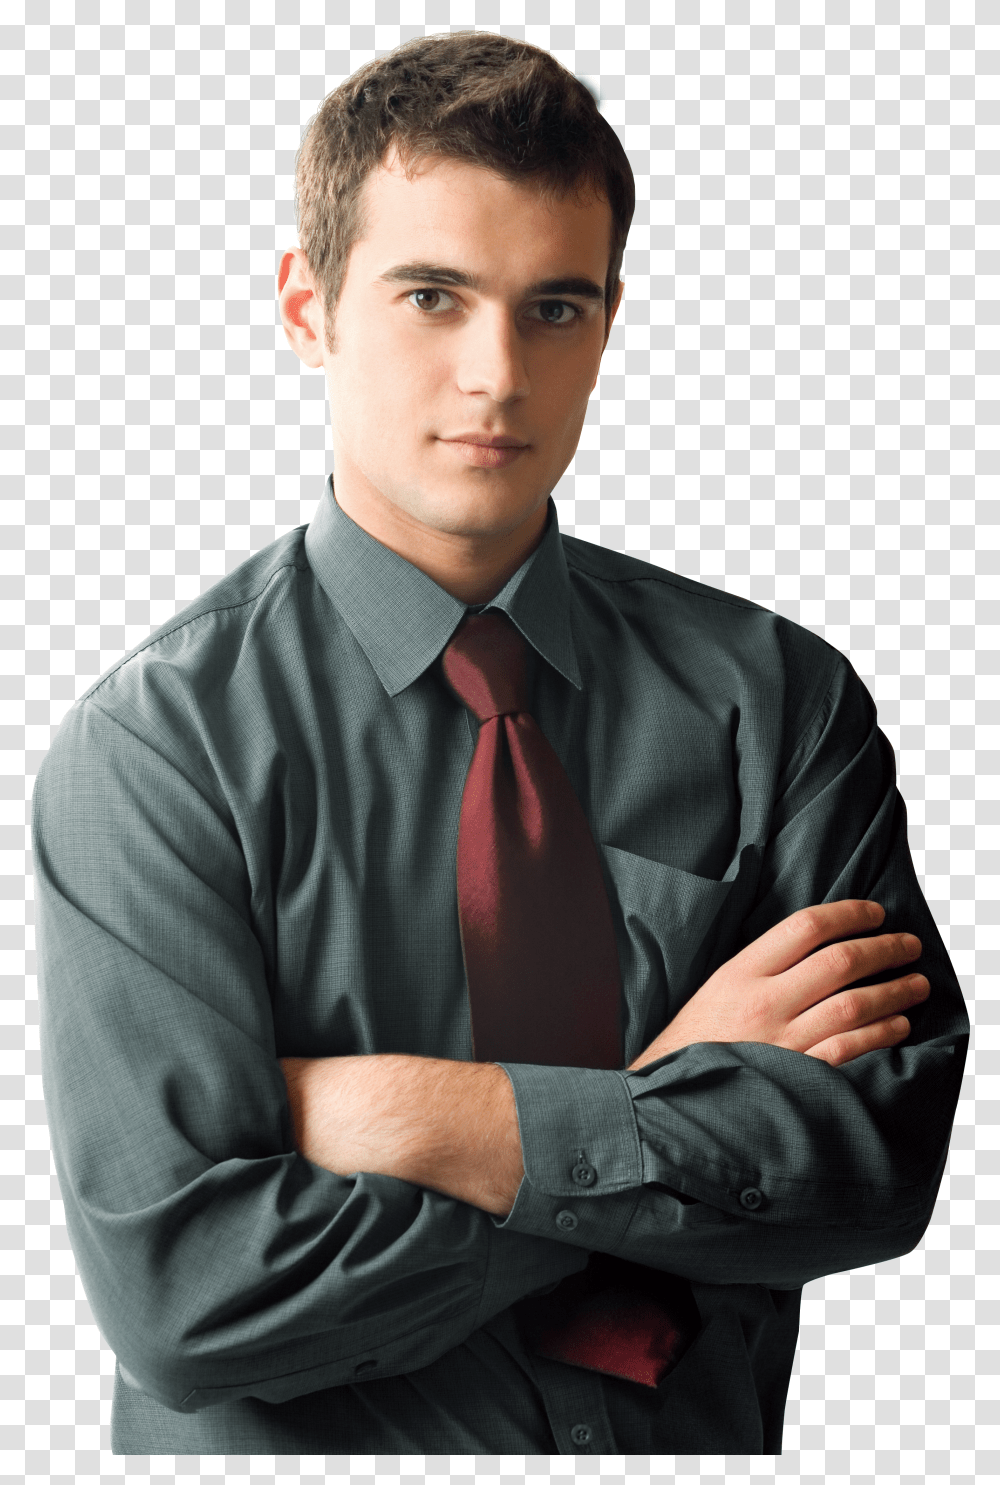 Pin By Barbaresso Dan On Models Mens Man Crossed Arms Transparent Png